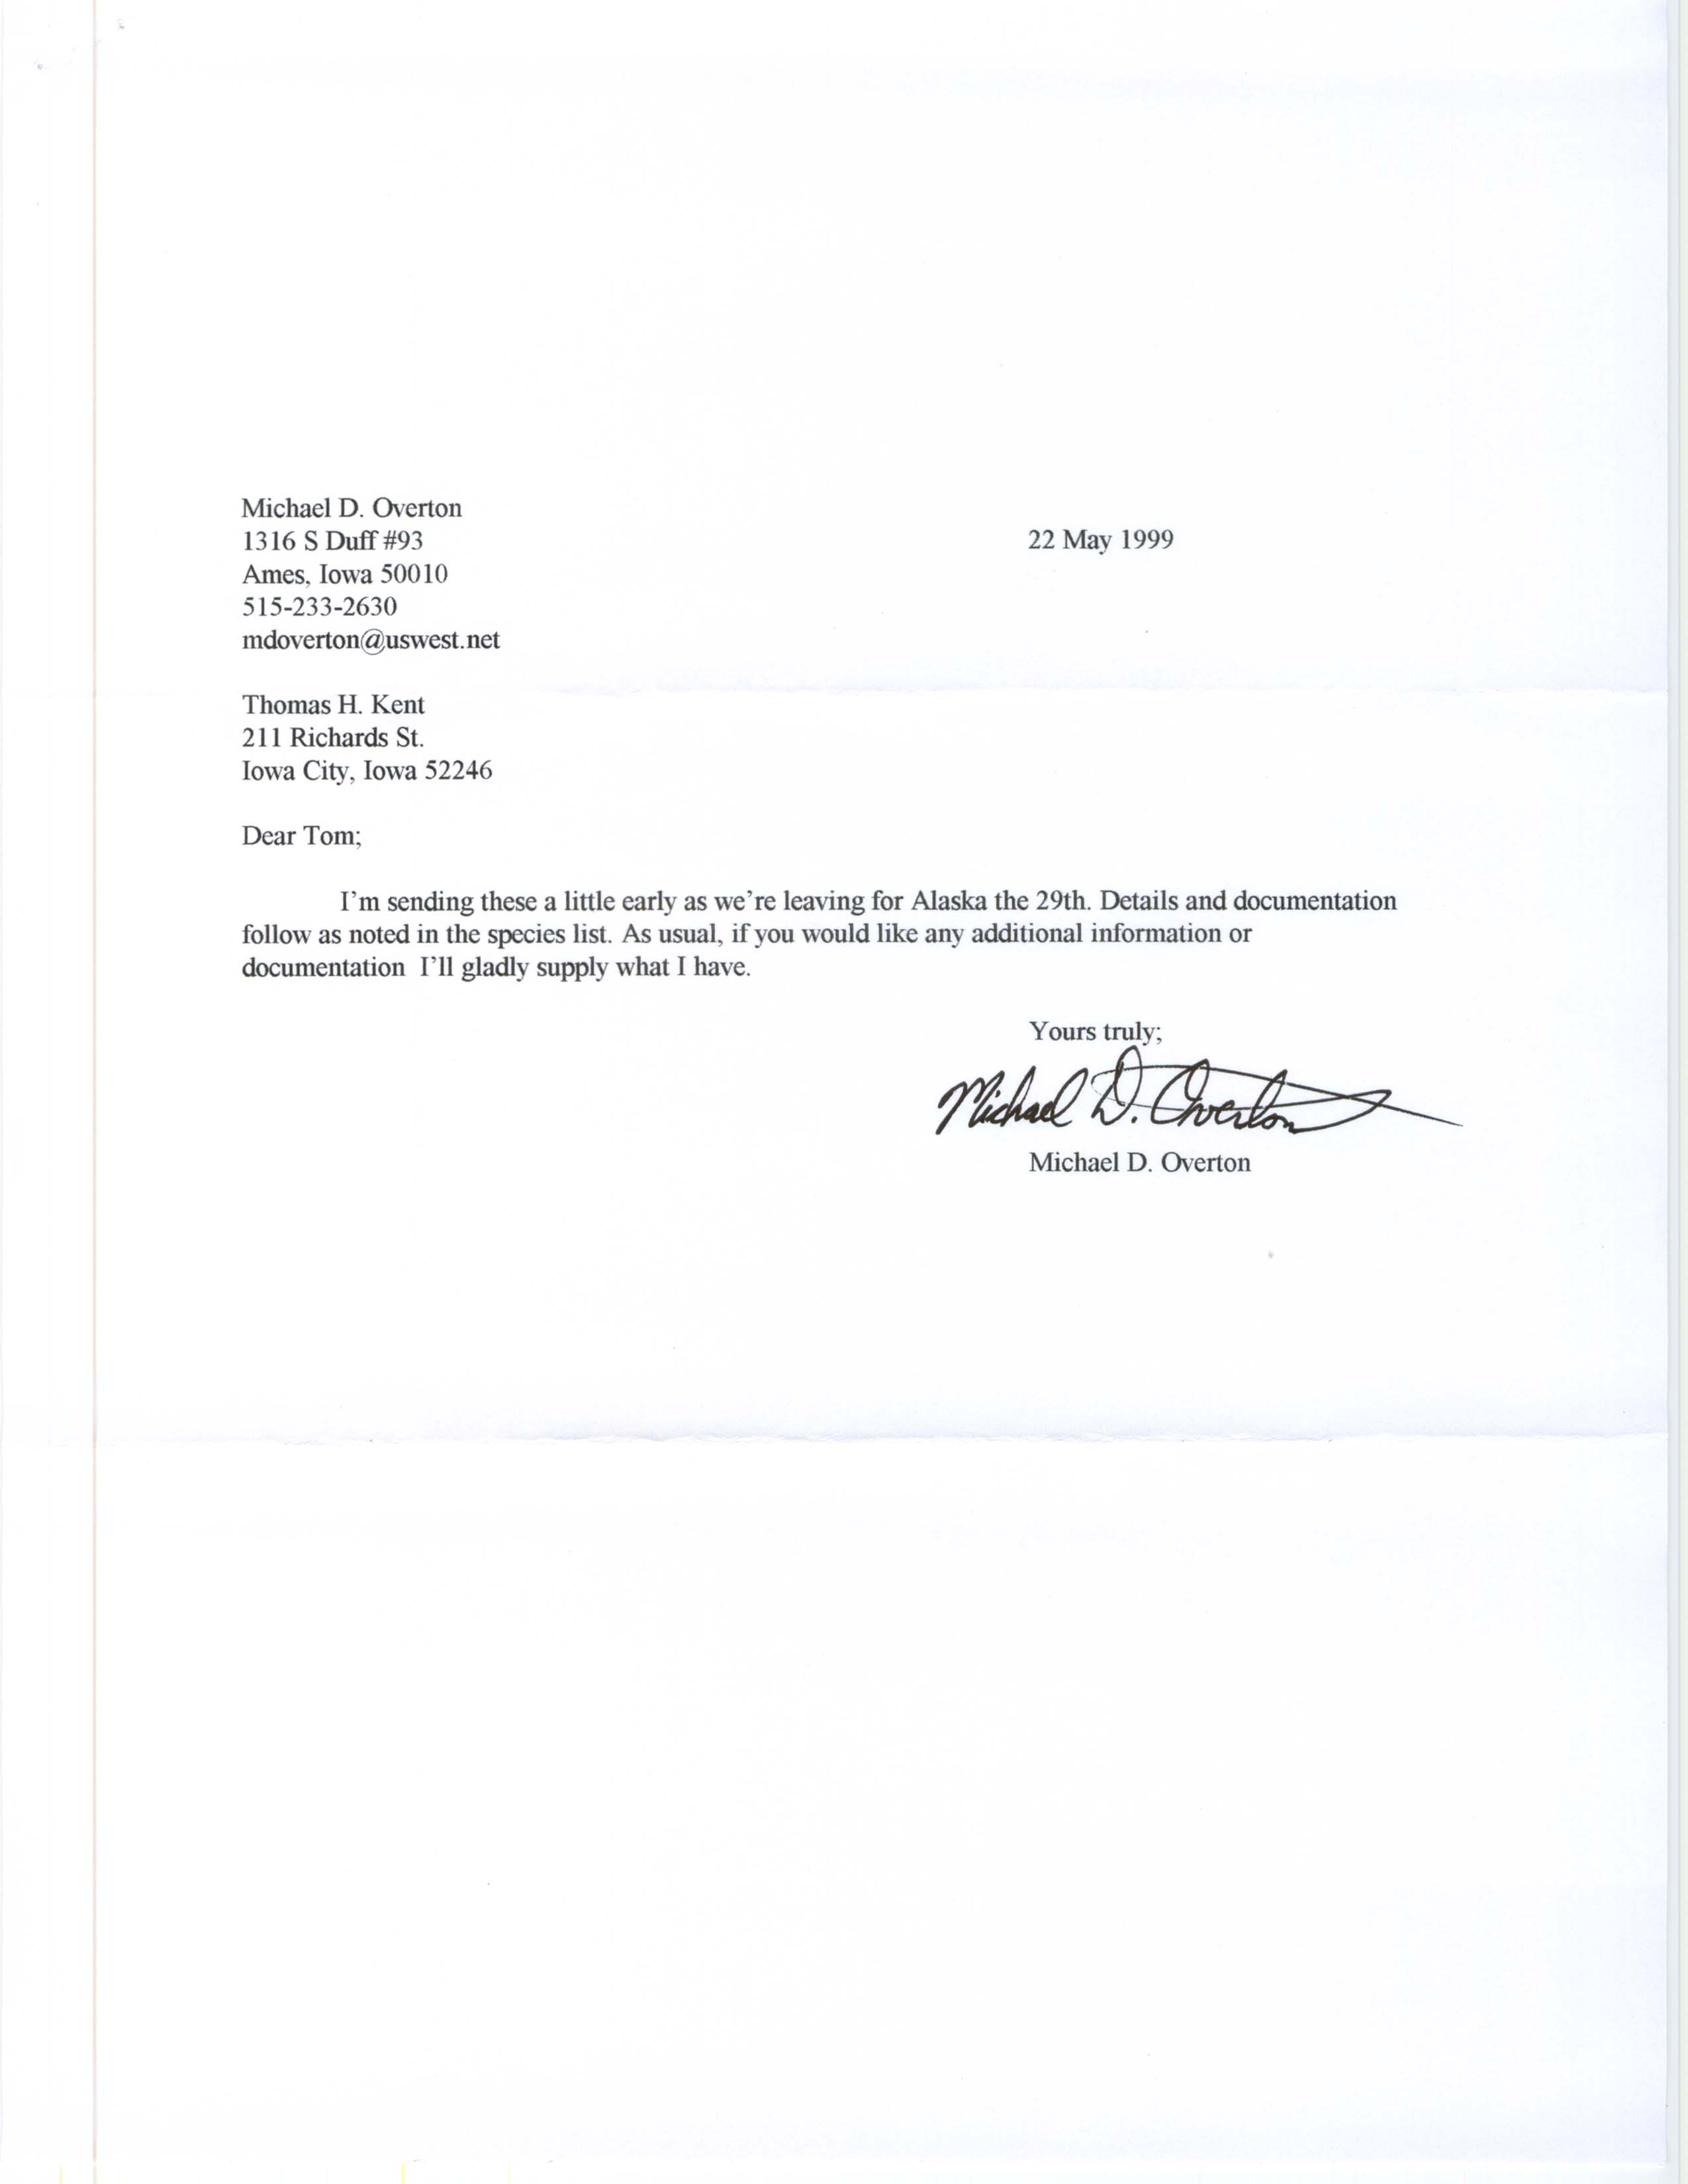 Michael Overton letter to Thomas Kent regarding field reports, May 22, 1999